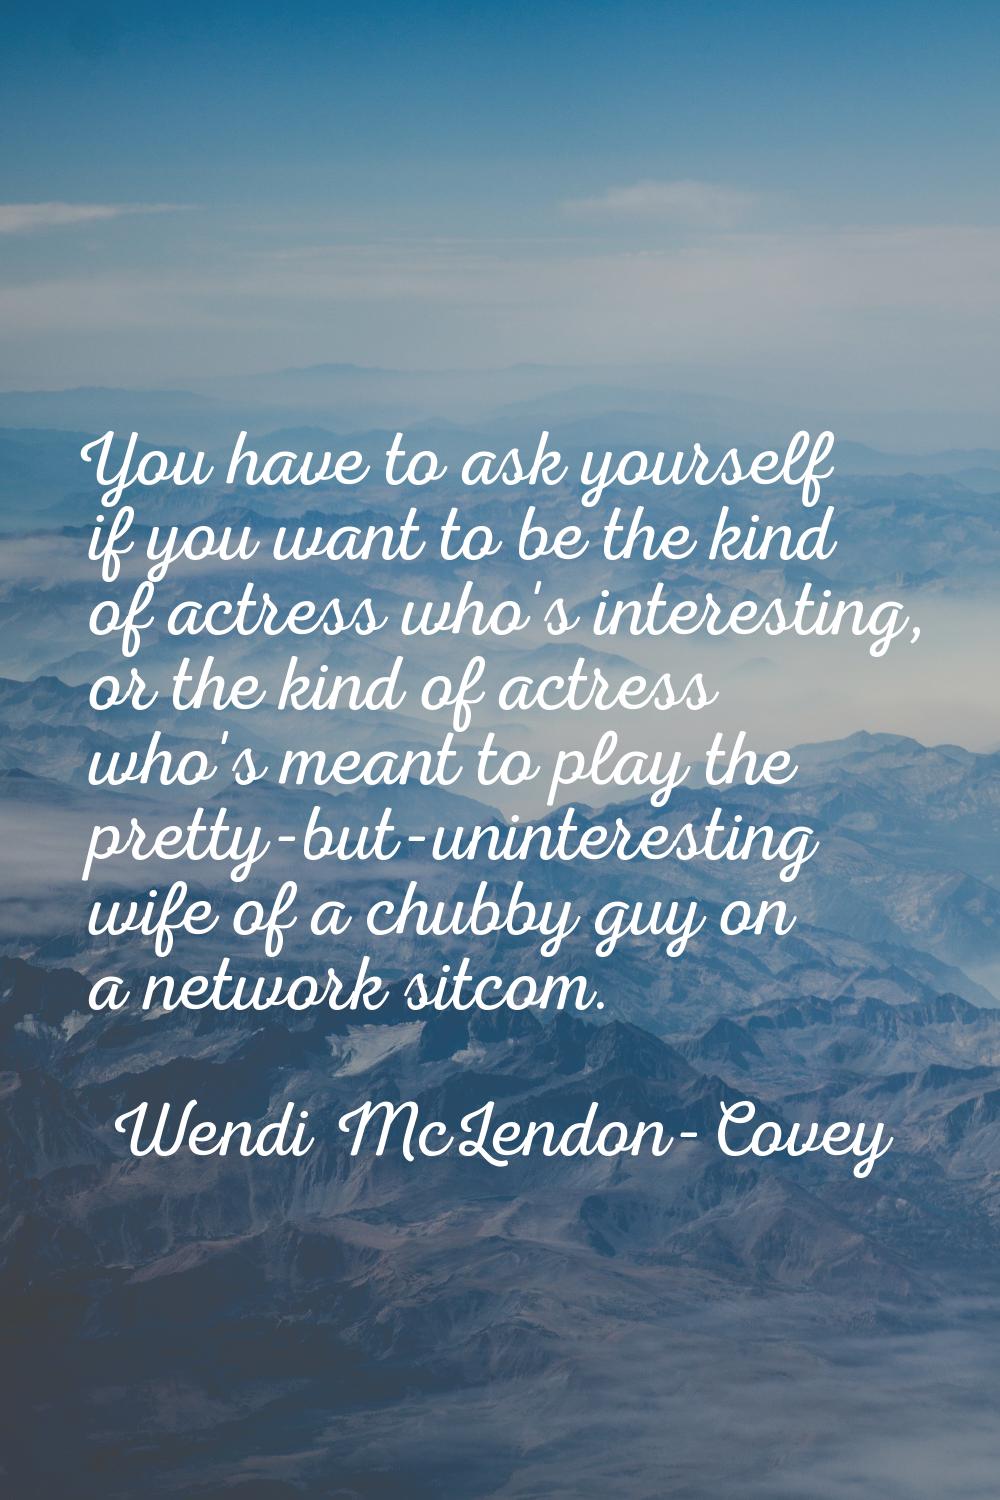 You have to ask yourself if you want to be the kind of actress who's interesting, or the kind of ac